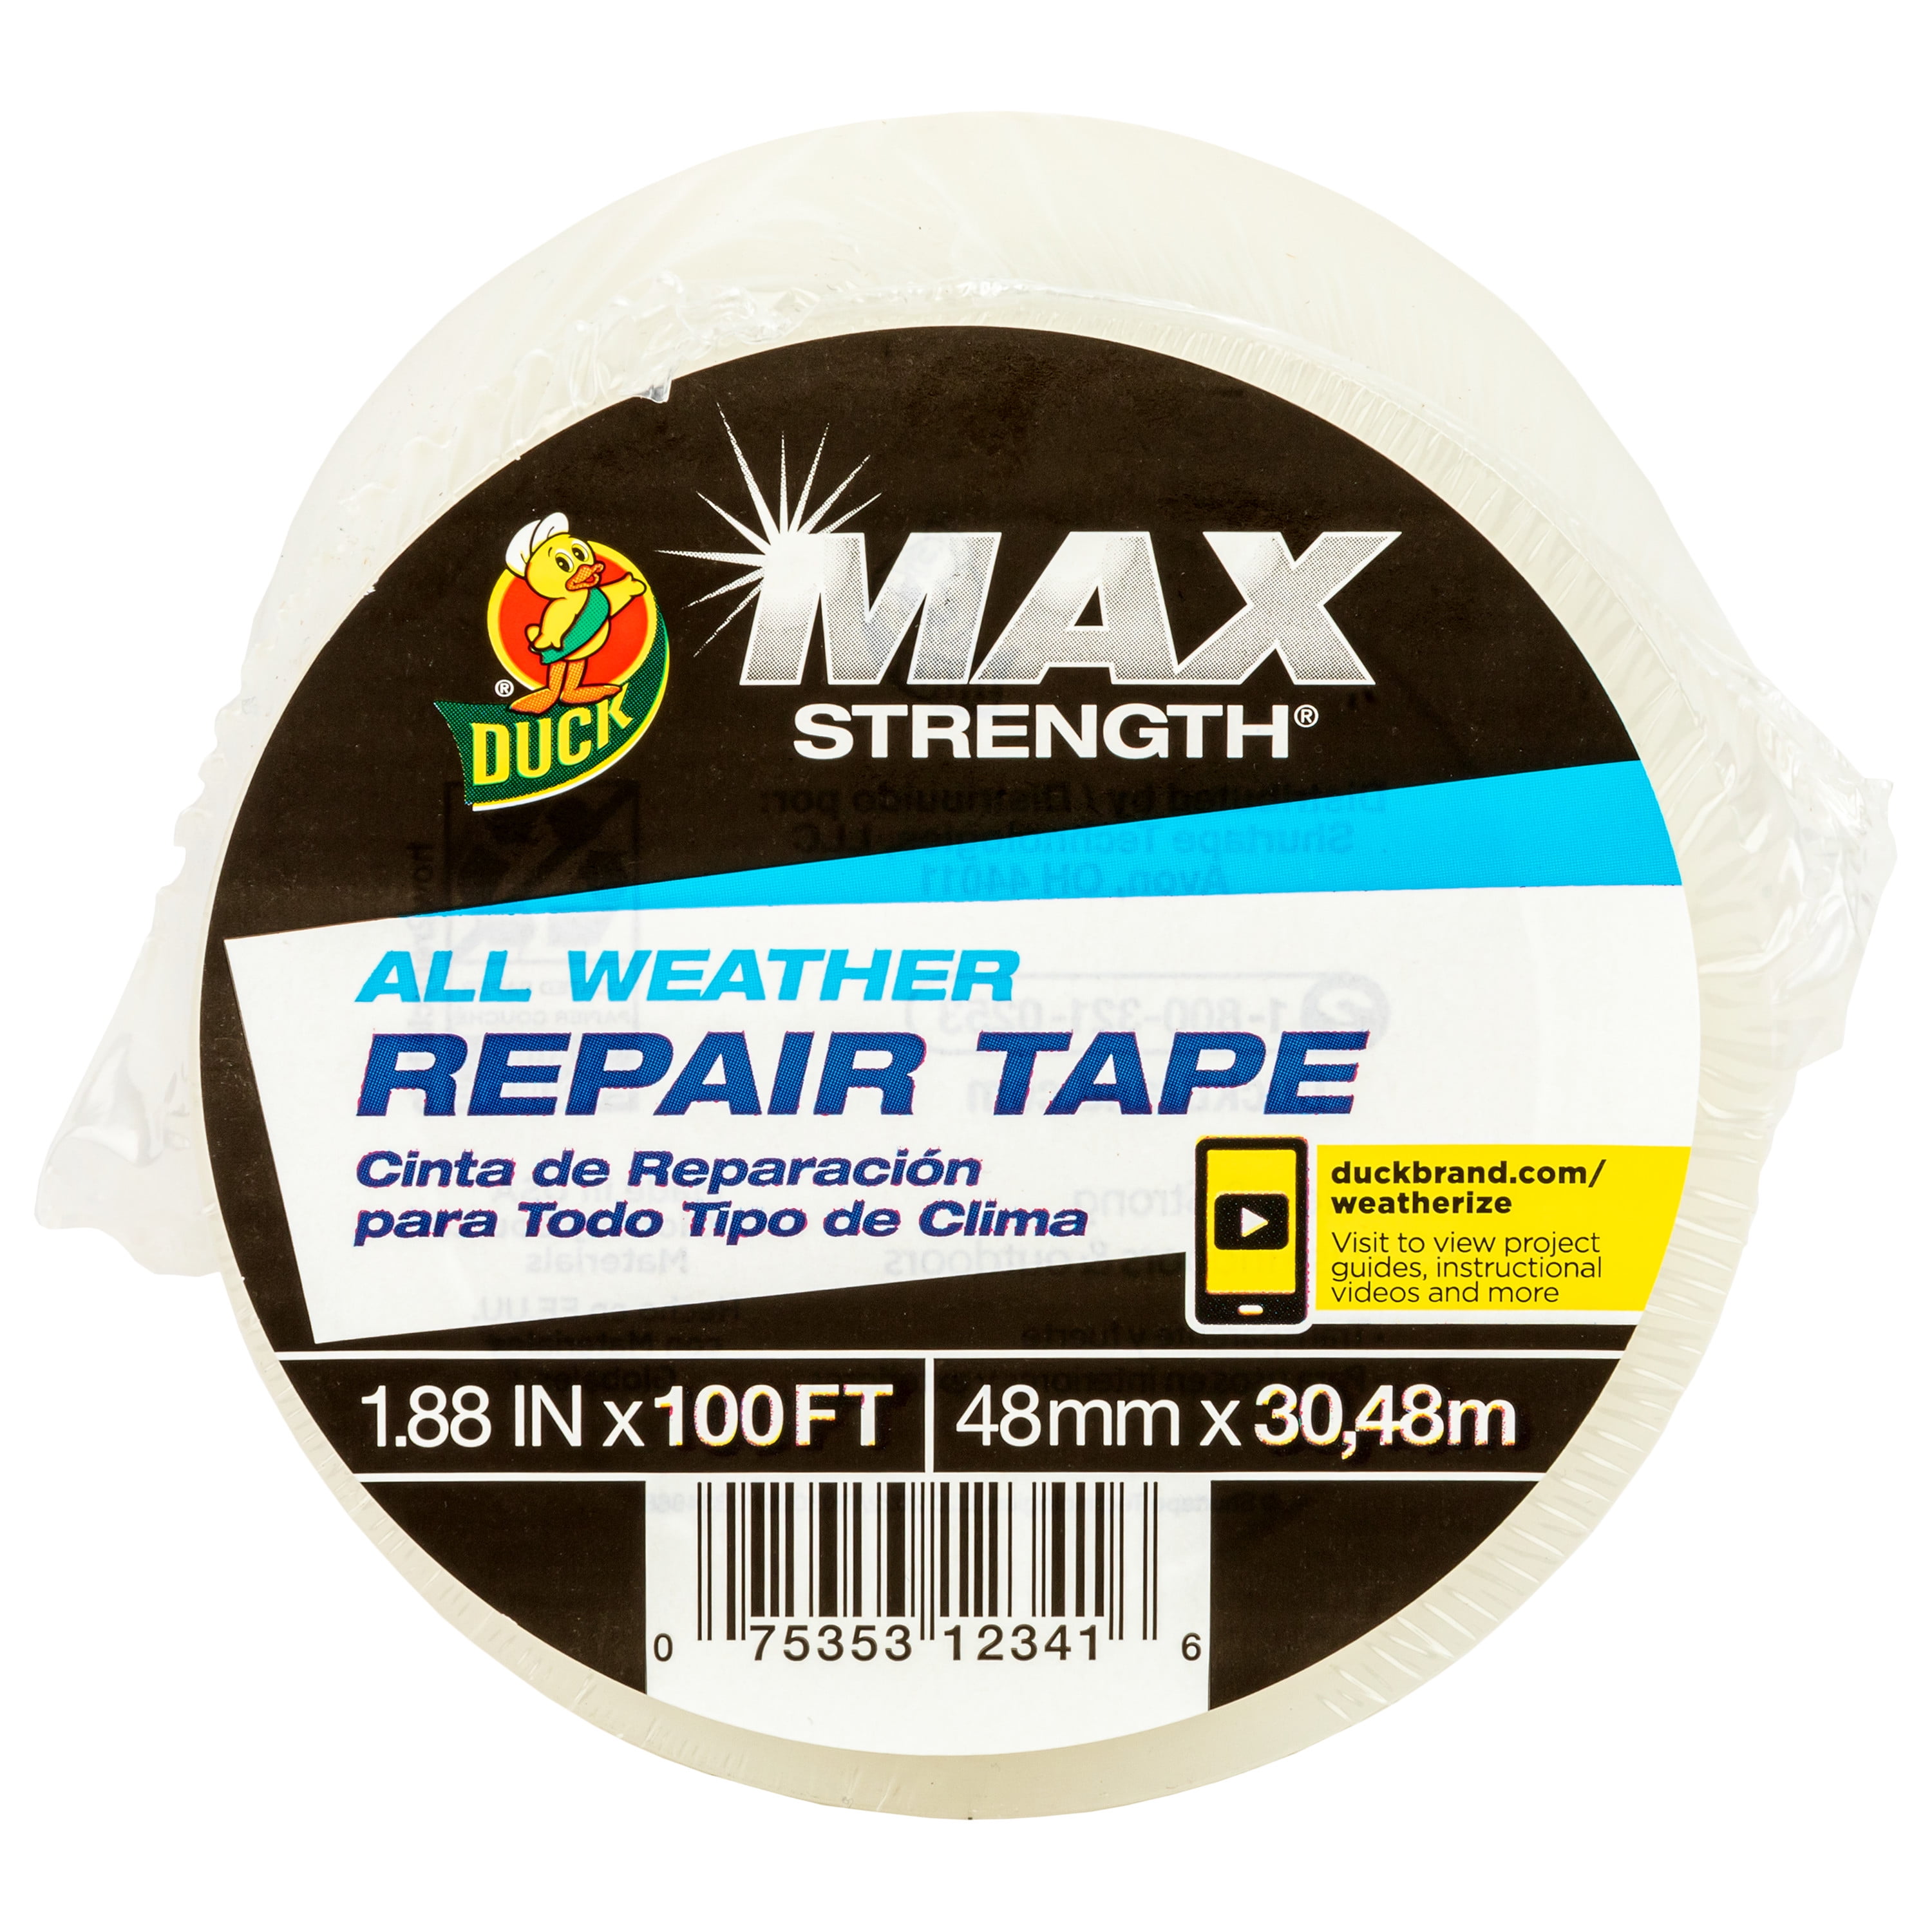 Gorilla Tape Adhesive Roll - White - Weather Resistant - 30-ft L x 1.88-in W